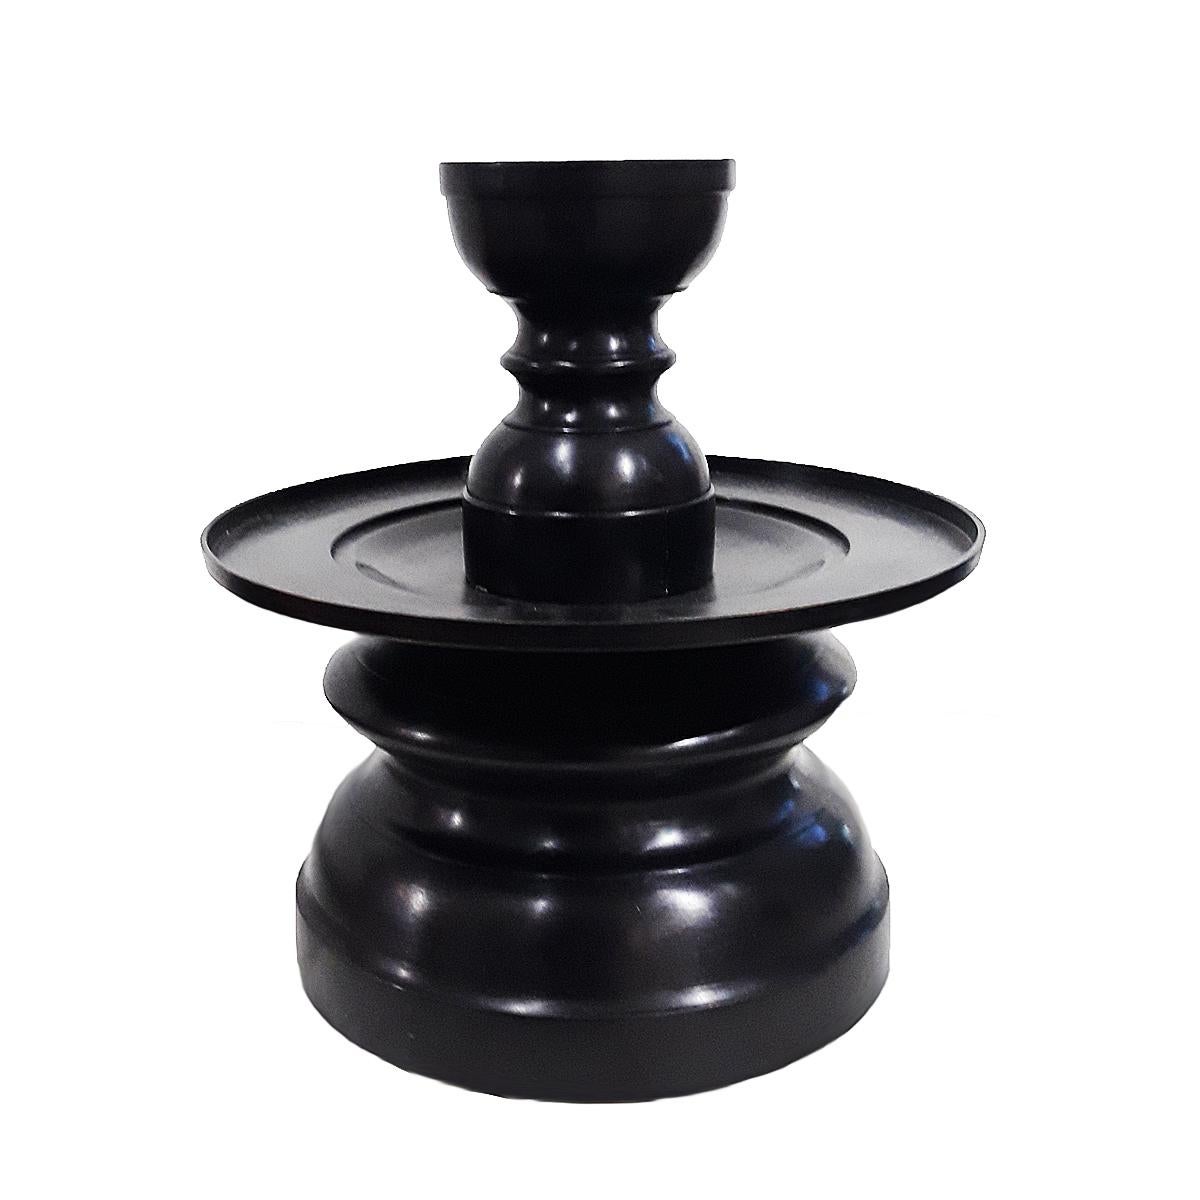 A tall bronze candlestick in forged bronze, black finish. Contemporary. The 9.5-inch diameter top plate is designed to hold large size candles, and includes a removable top that holds smaller size candles. 17.5 inches tall, with a 9-inch base. A